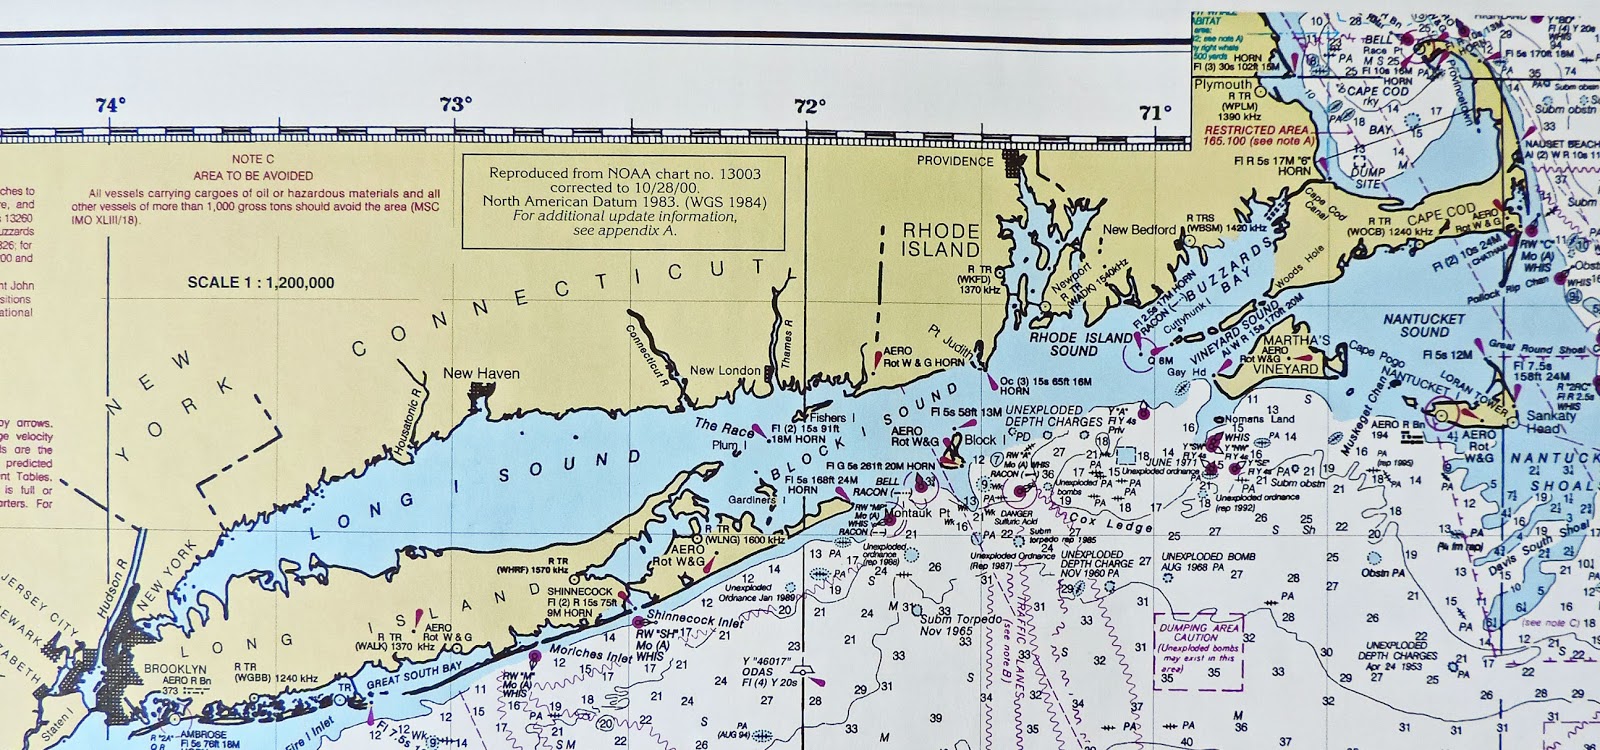 Great Loop Two - Last Dance: Long Island Sound to Buzzards Bay